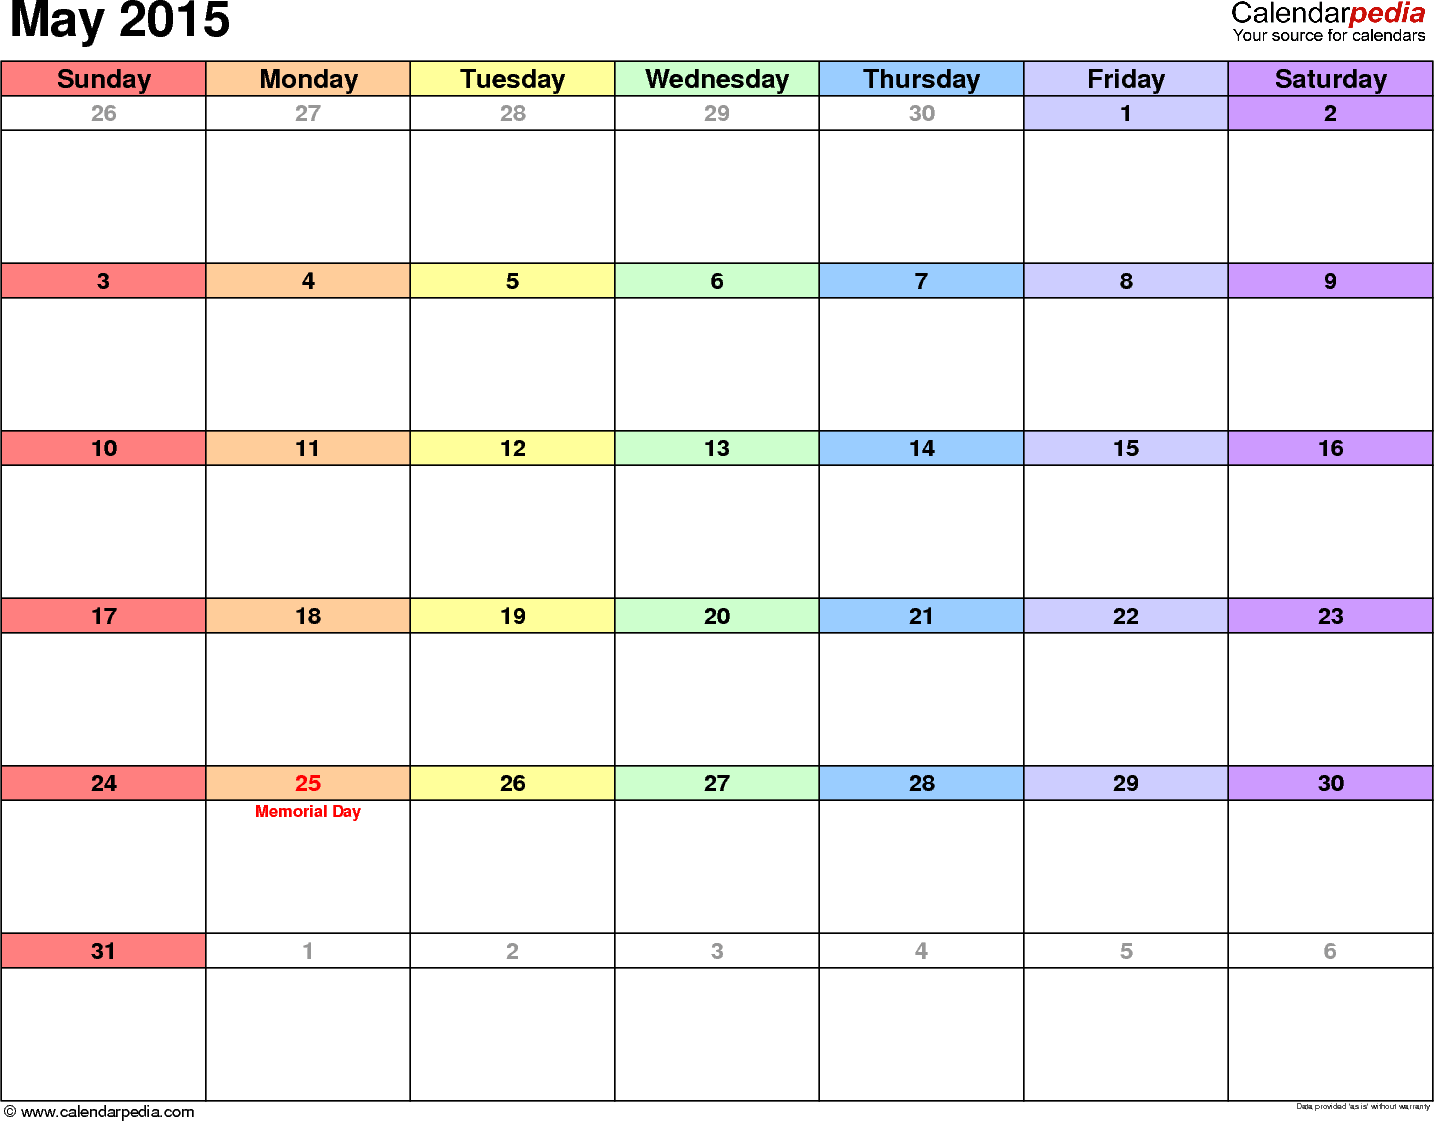 13 May 2015 Calendar Template Images